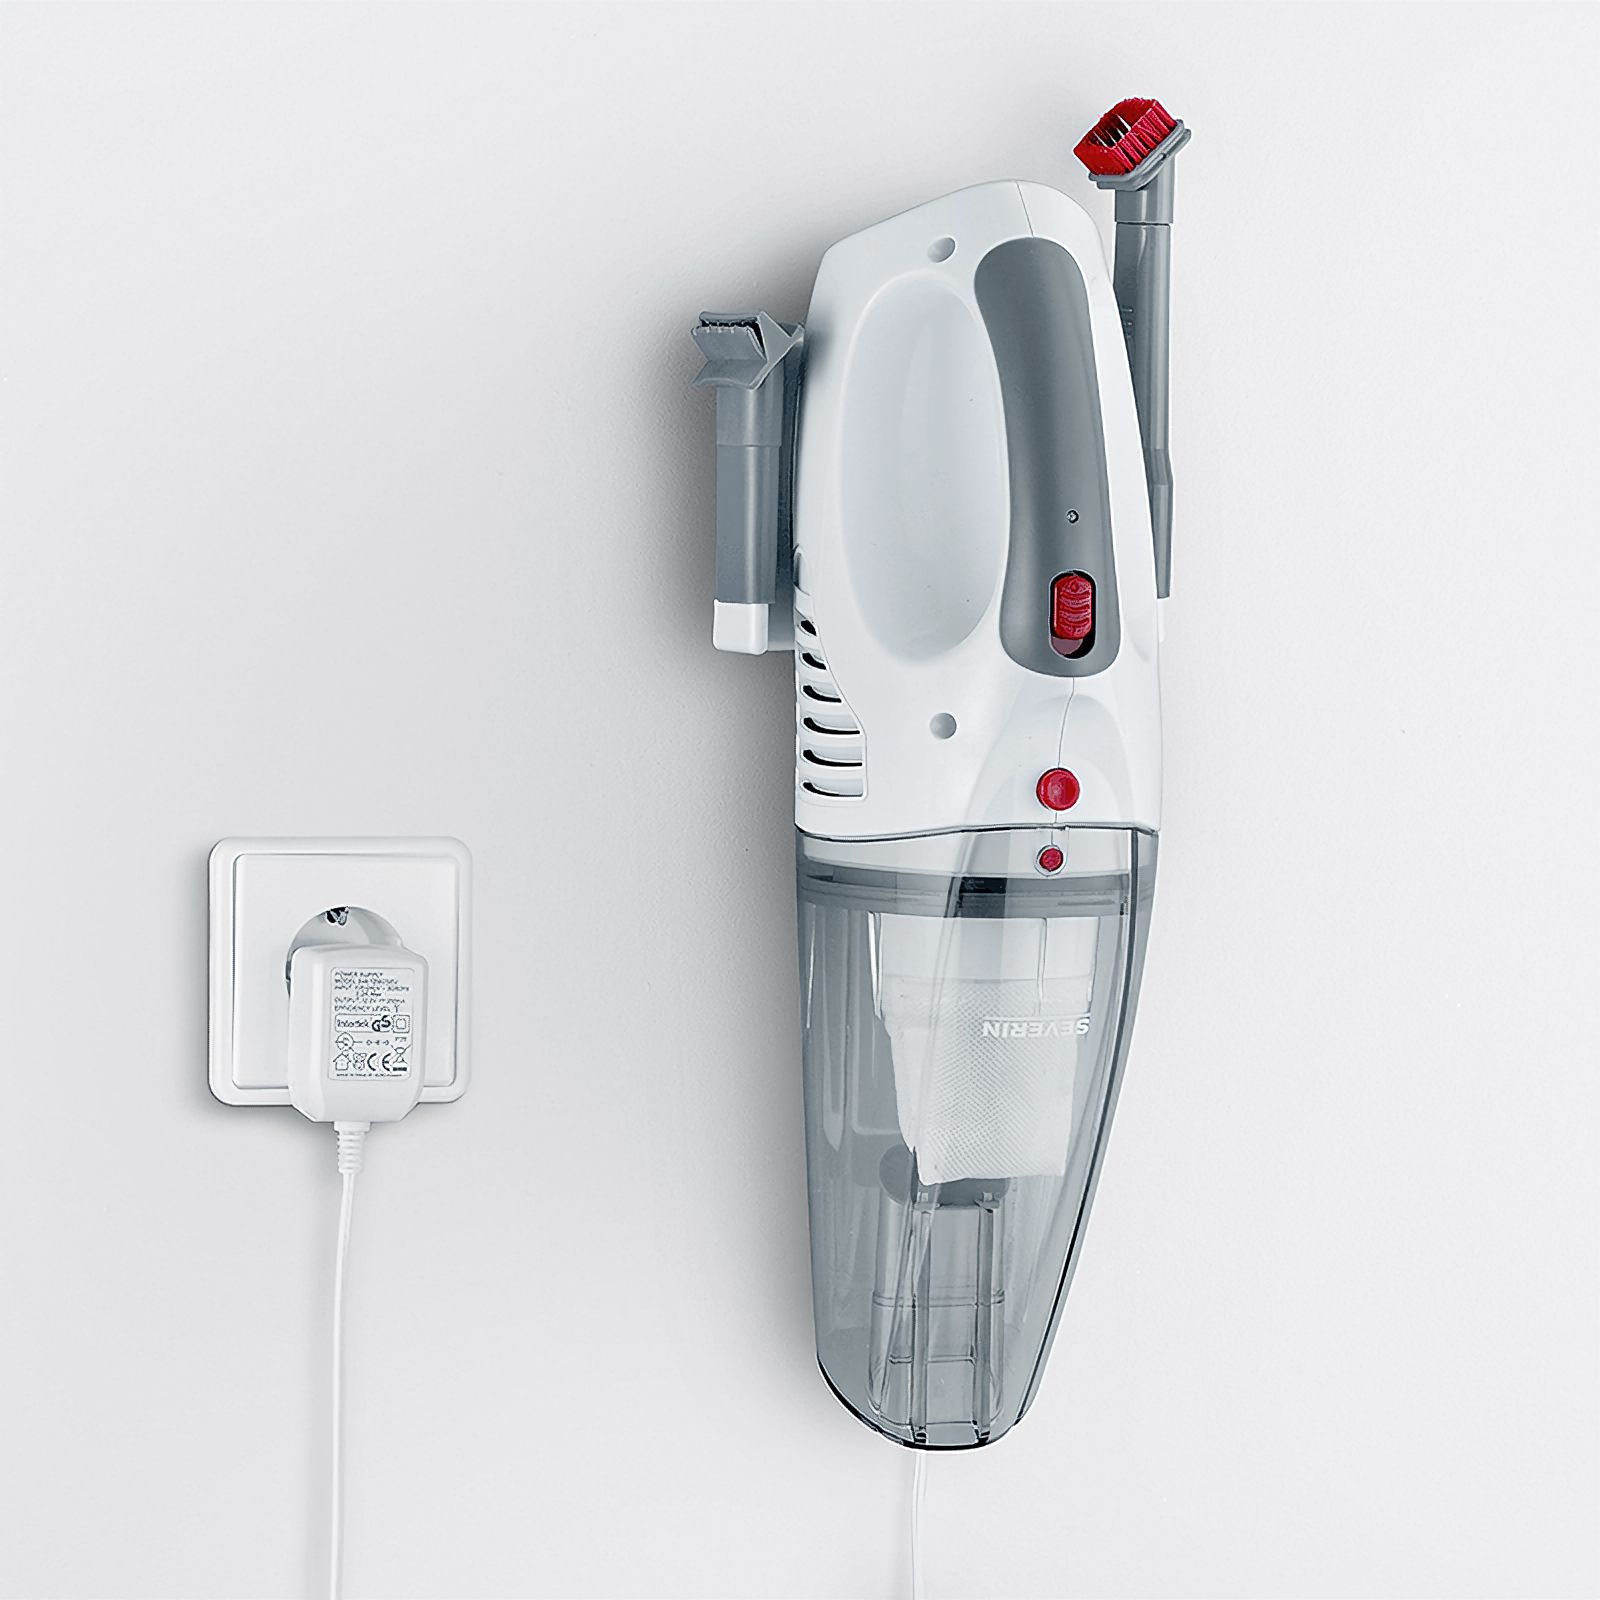 Severin Spower Home & Car hand Vacuum Cleaner